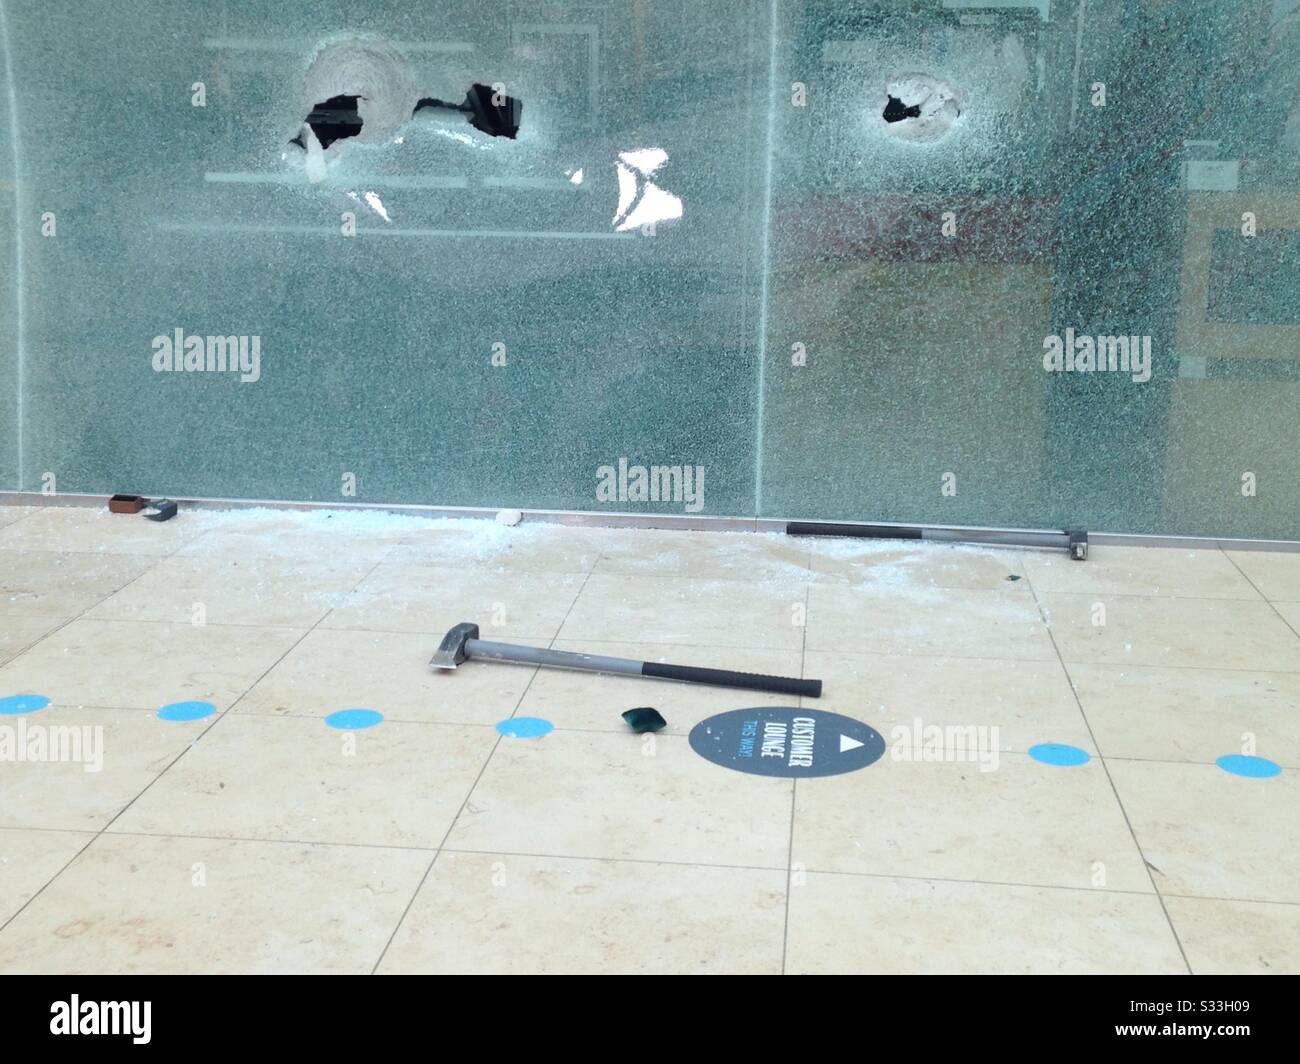 Basingstoke, UK- February 25, 2019: sledgehammers, broken glass and jewellery display boxes on th floor outside Beverbrook's jewellery shop in Festival Place basingstoke after a smash and grab robbery Stock Photo